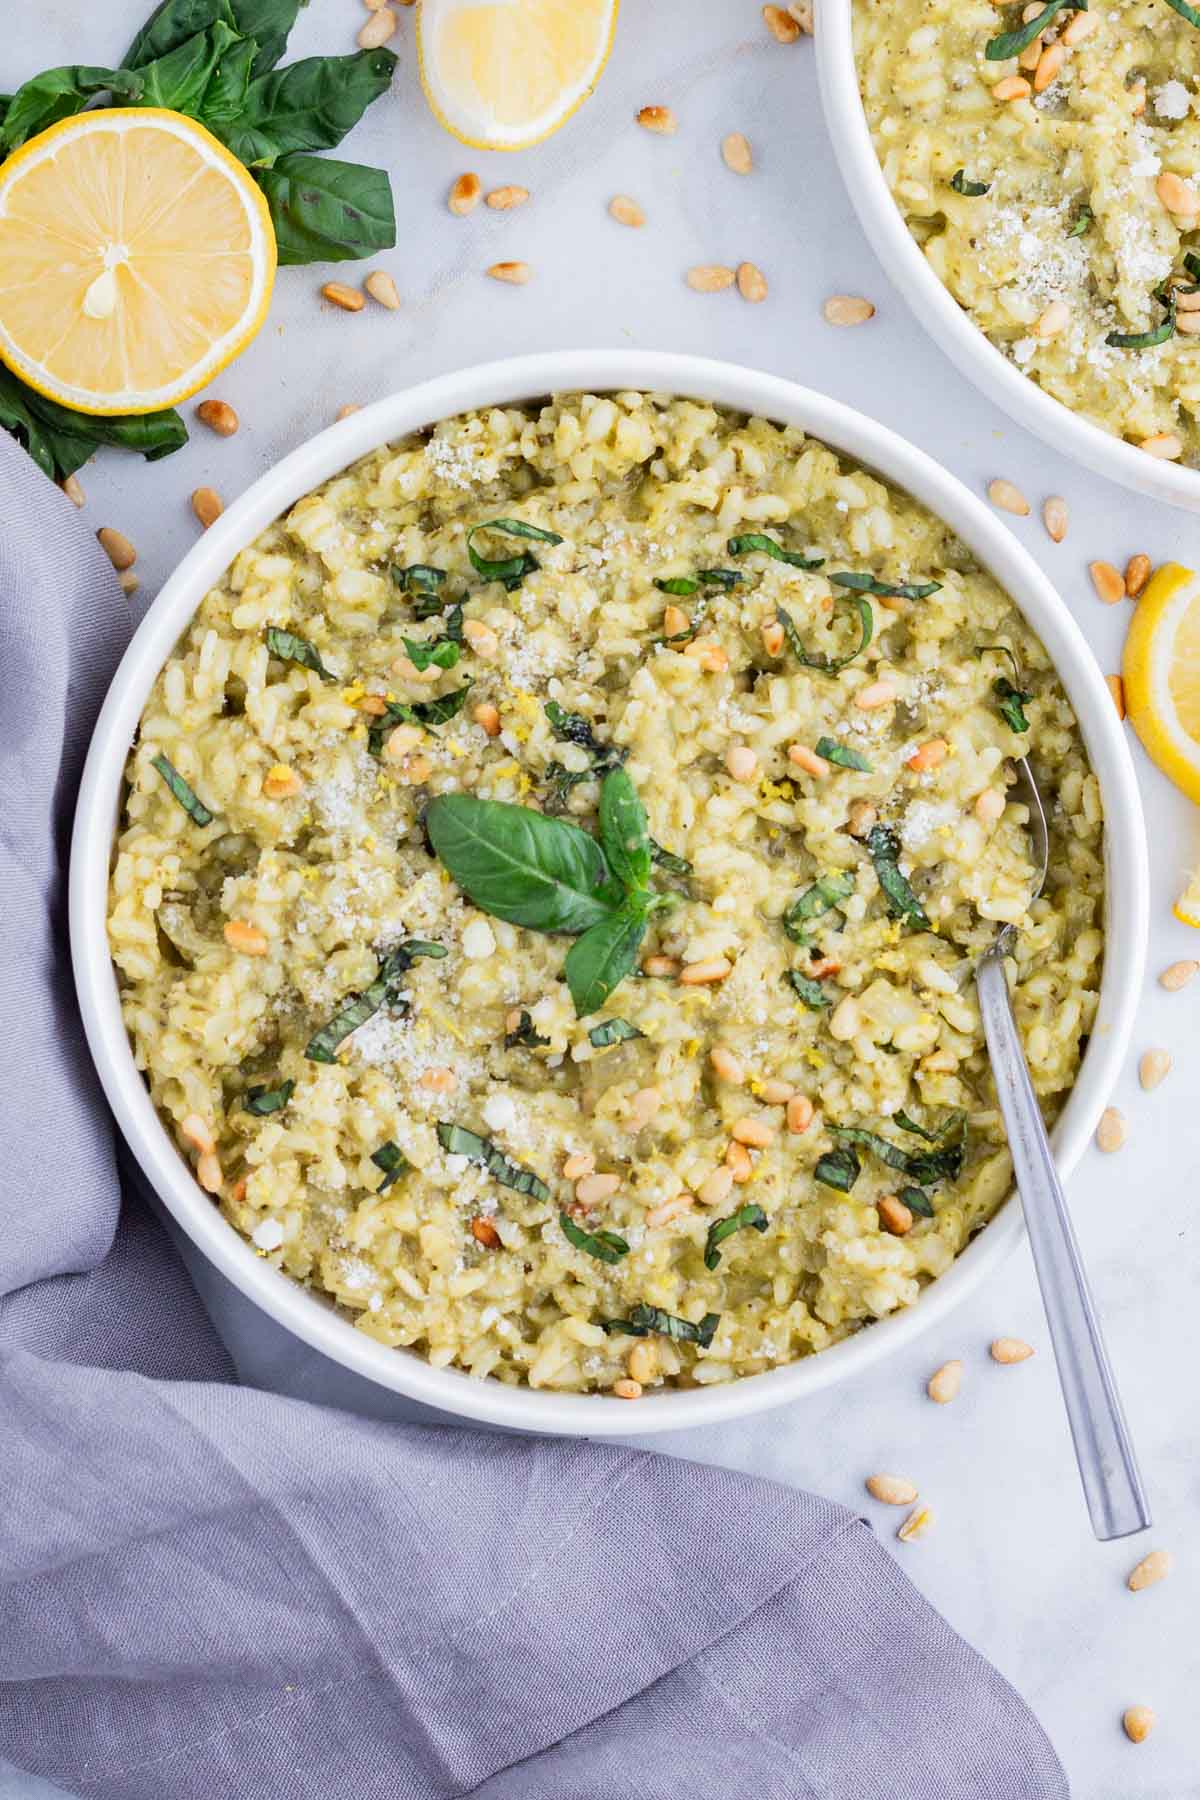 A spoon is used to serve pesto risotto.